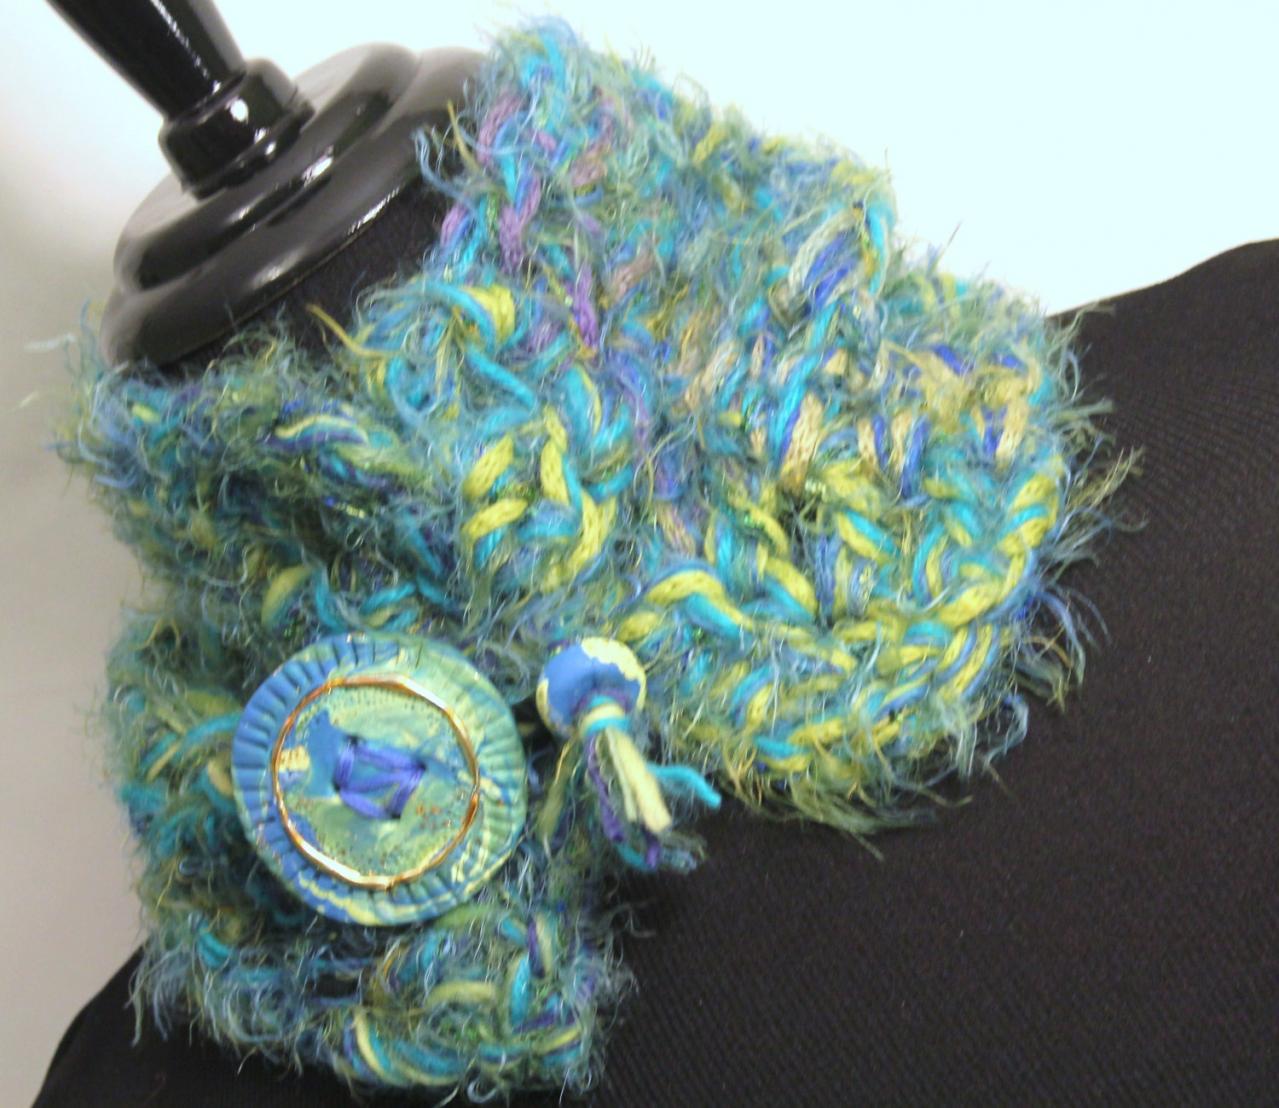 Womens Scarf, Cowl Neck, Peacock Colored Fuzzy Cowl Scarf, Custom Button With Gold Leaf, Warm, Soft And Chic Crochet From Art Fibers